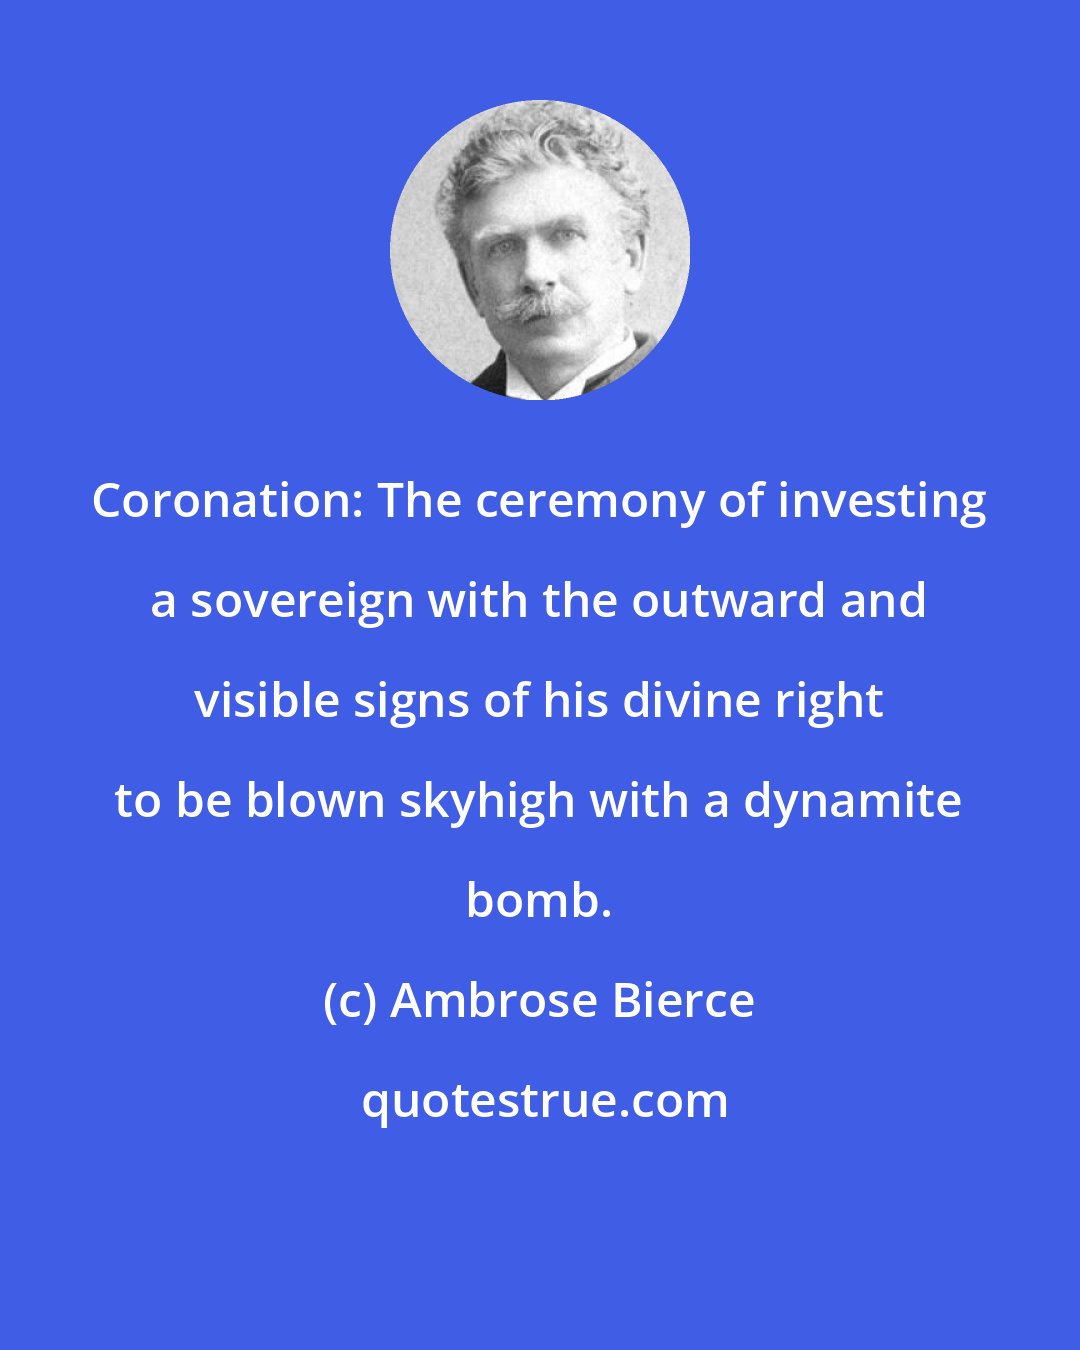 Ambrose Bierce: Coronation: The ceremony of investing a sovereign with the outward and visible signs of his divine right to be blown skyhigh with a dynamite bomb.